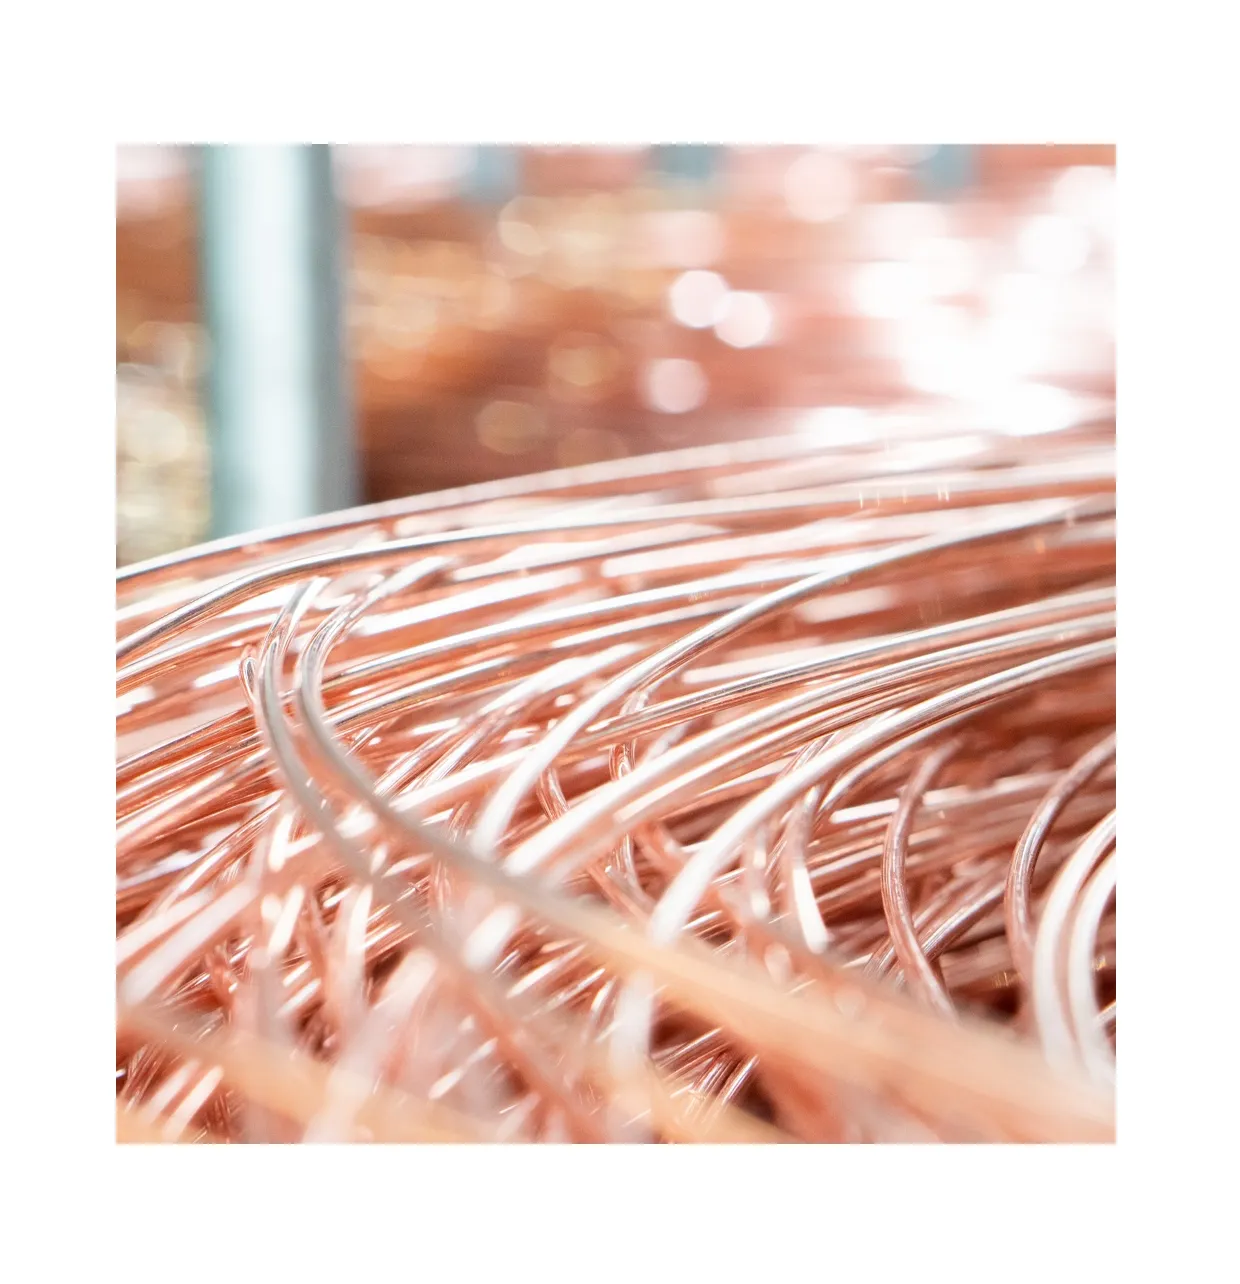 Copper drawn wire 0.5 - 1.3mm ASTM B3 Standard Cable Wire 0.5mm - 1.3mm Diameter Non-alloy High Standard